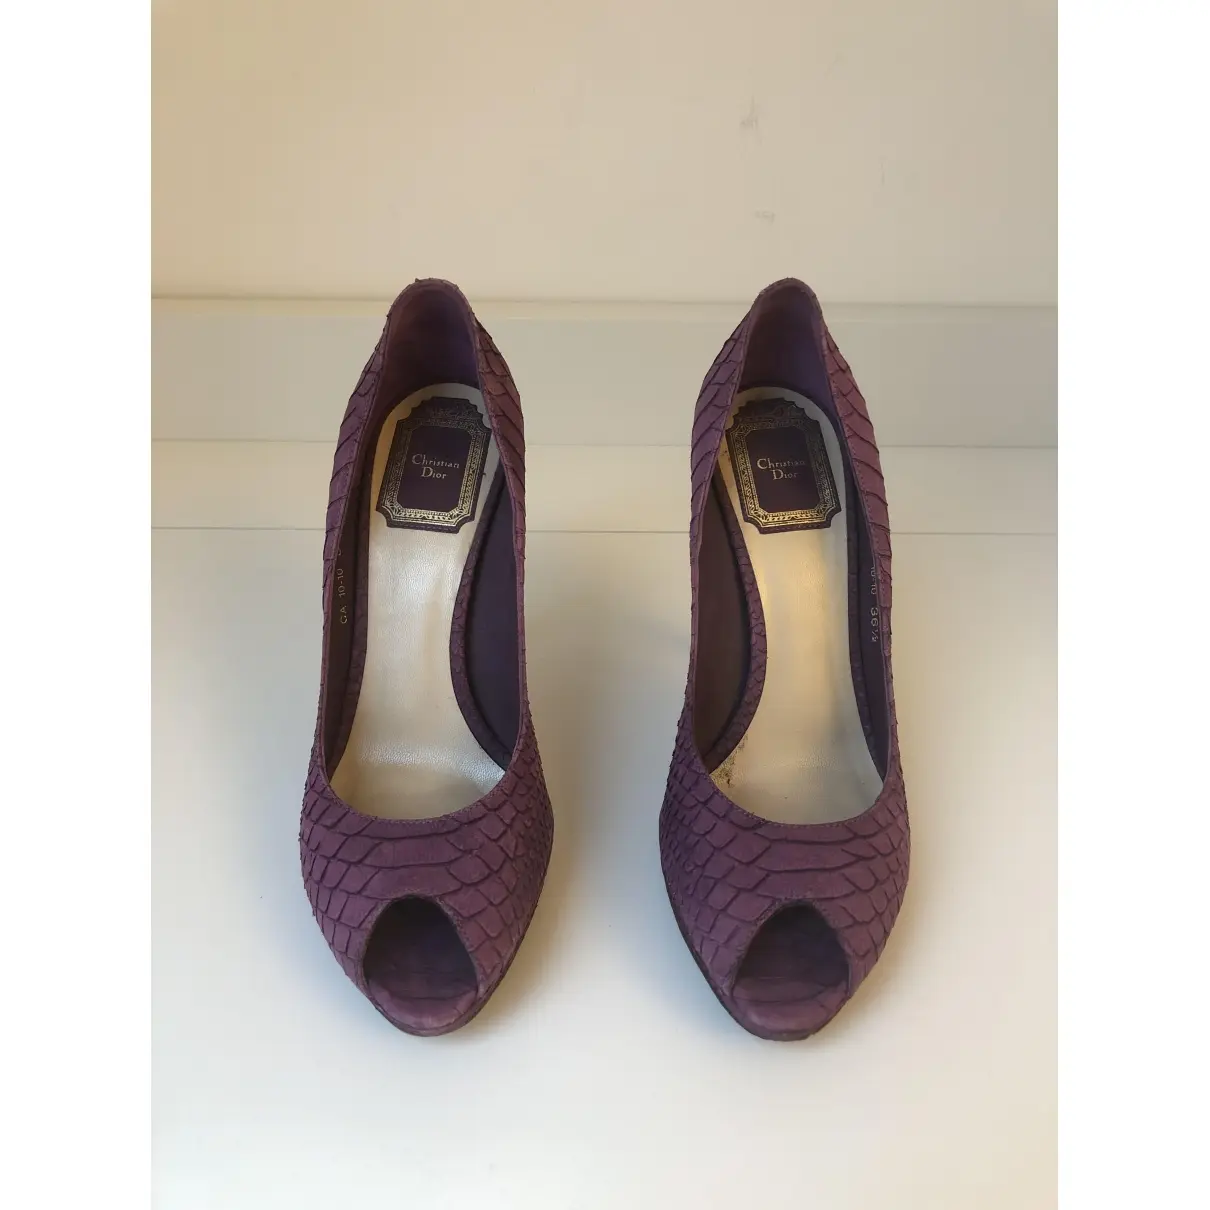 Christian Dior Heels for sale